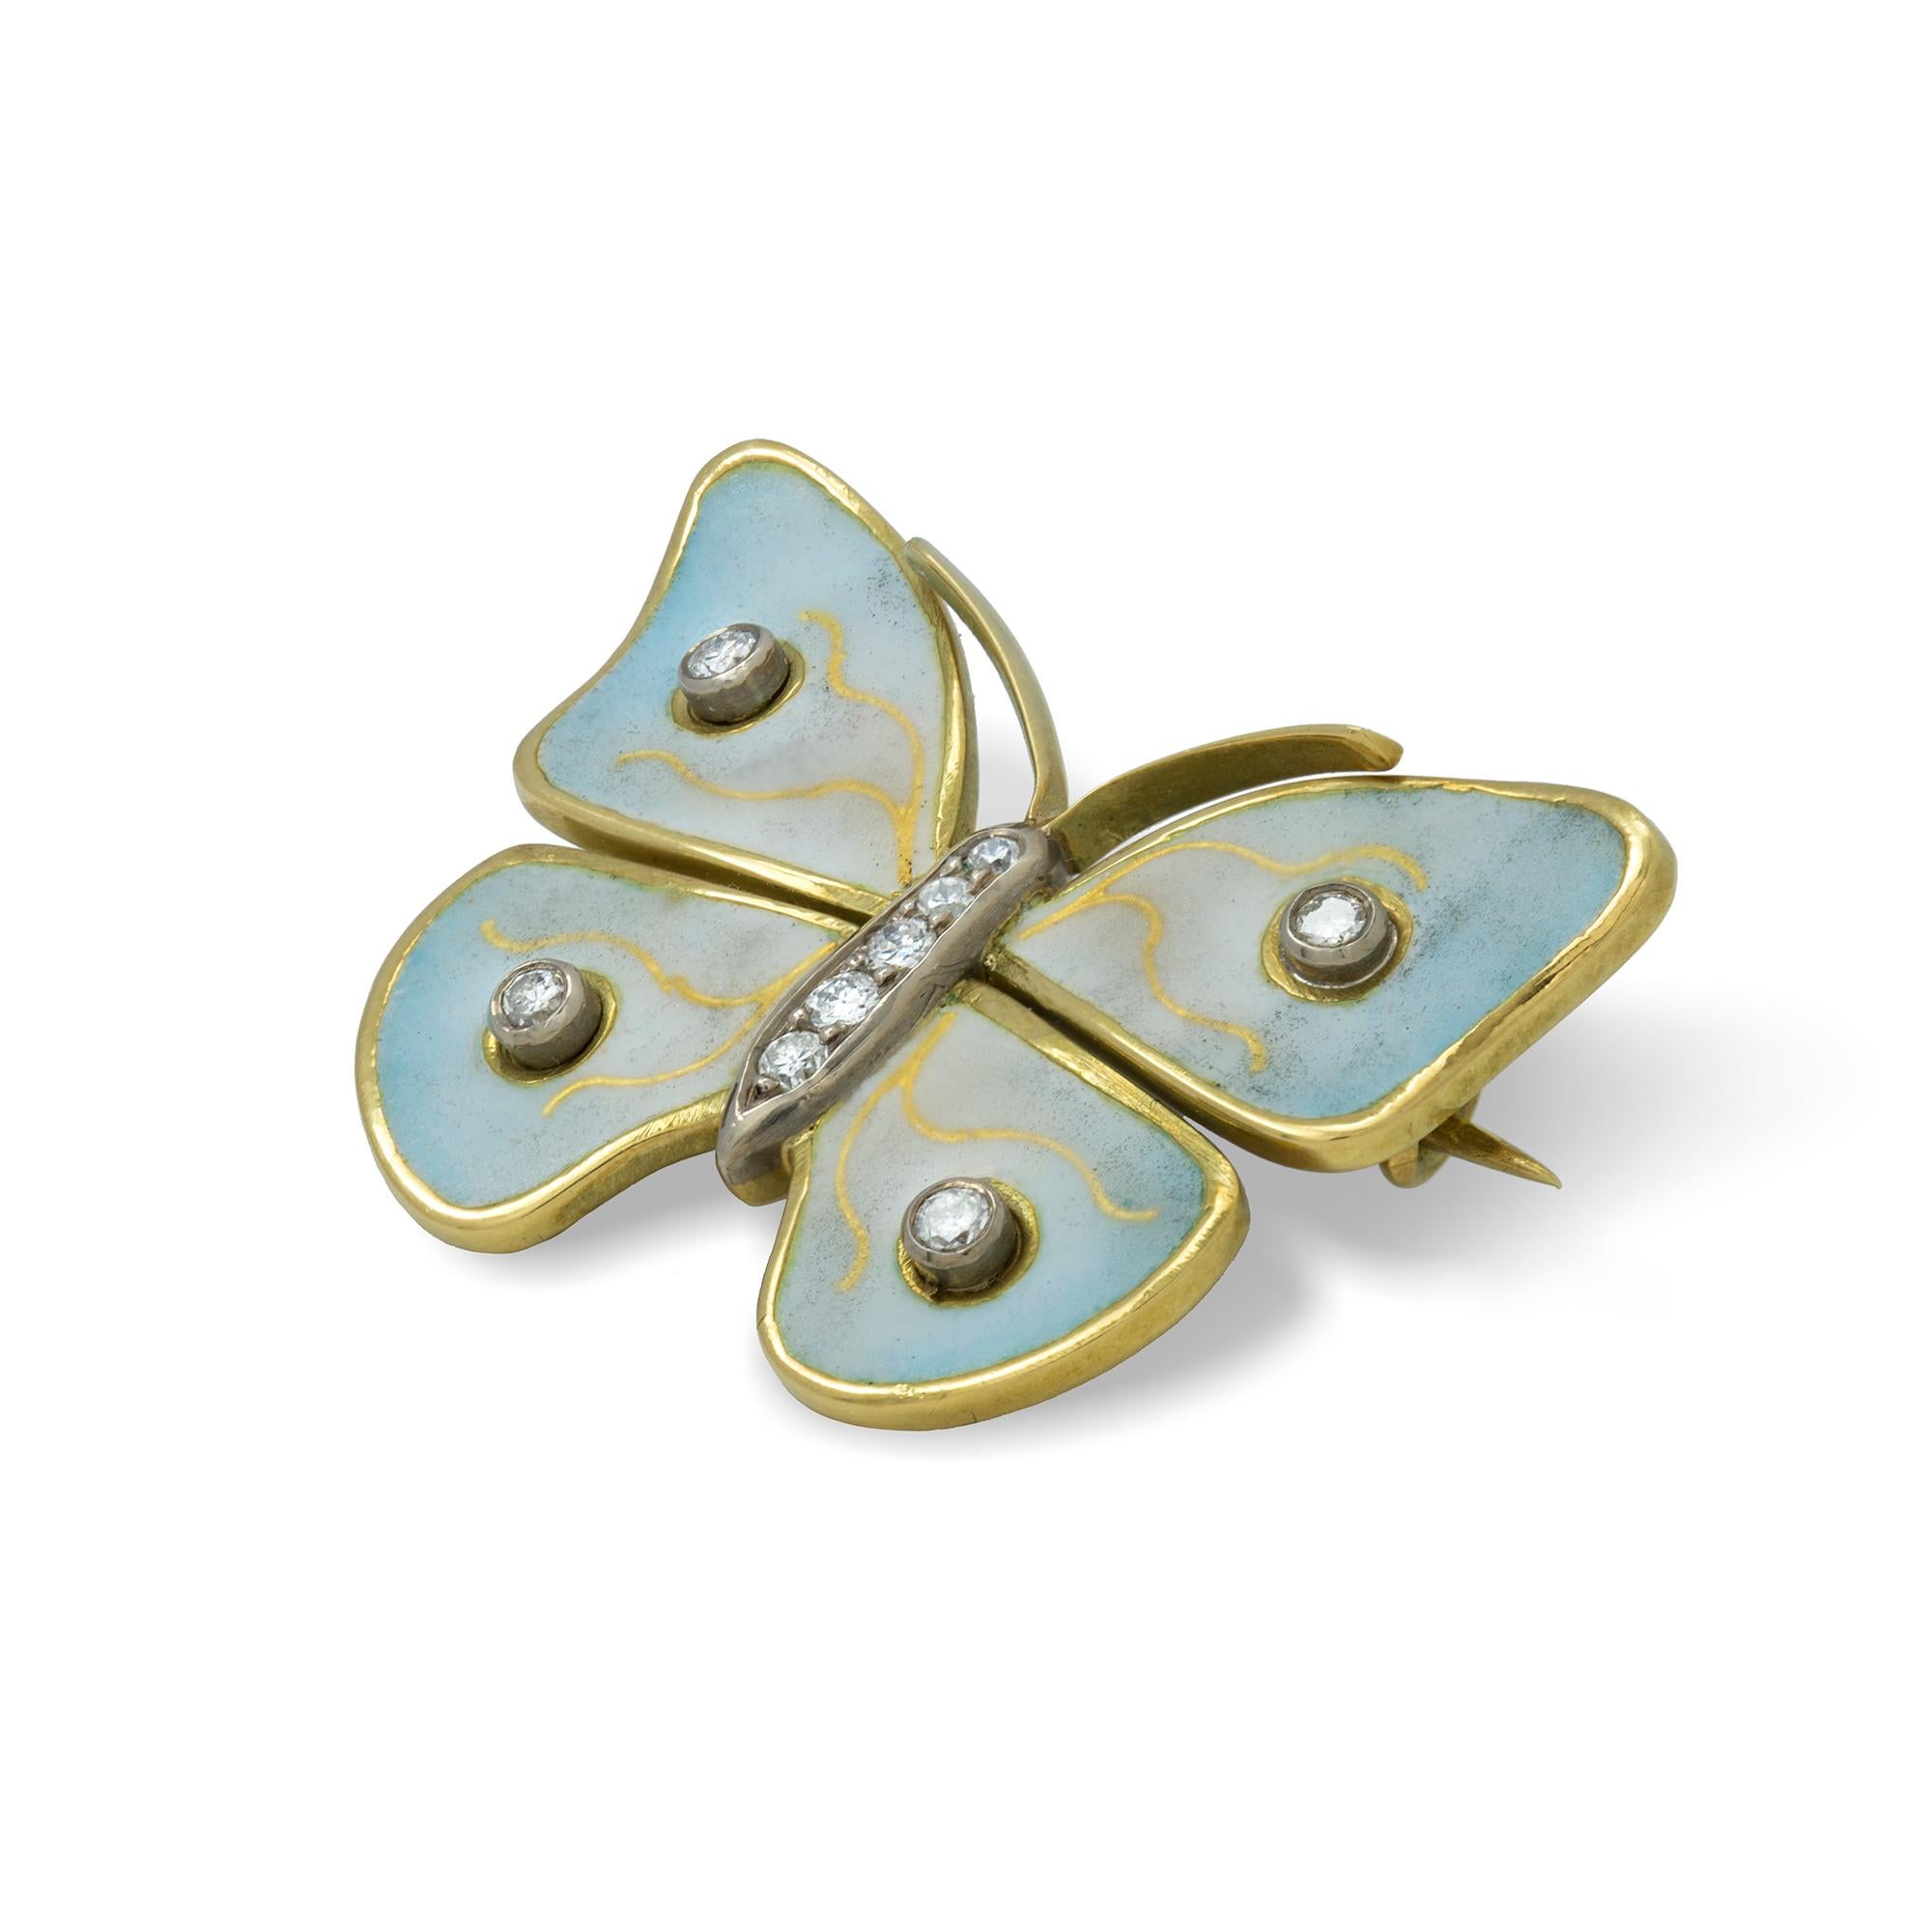 A diamond and enamel brooch in the form of a butterfly, the body set with diamond, the wings set with two diamonds each, with enamelled yellow fading to light blue, mounted in 18ct yellow gold bearing the Bentley & Skinner sponsor mark, measuring